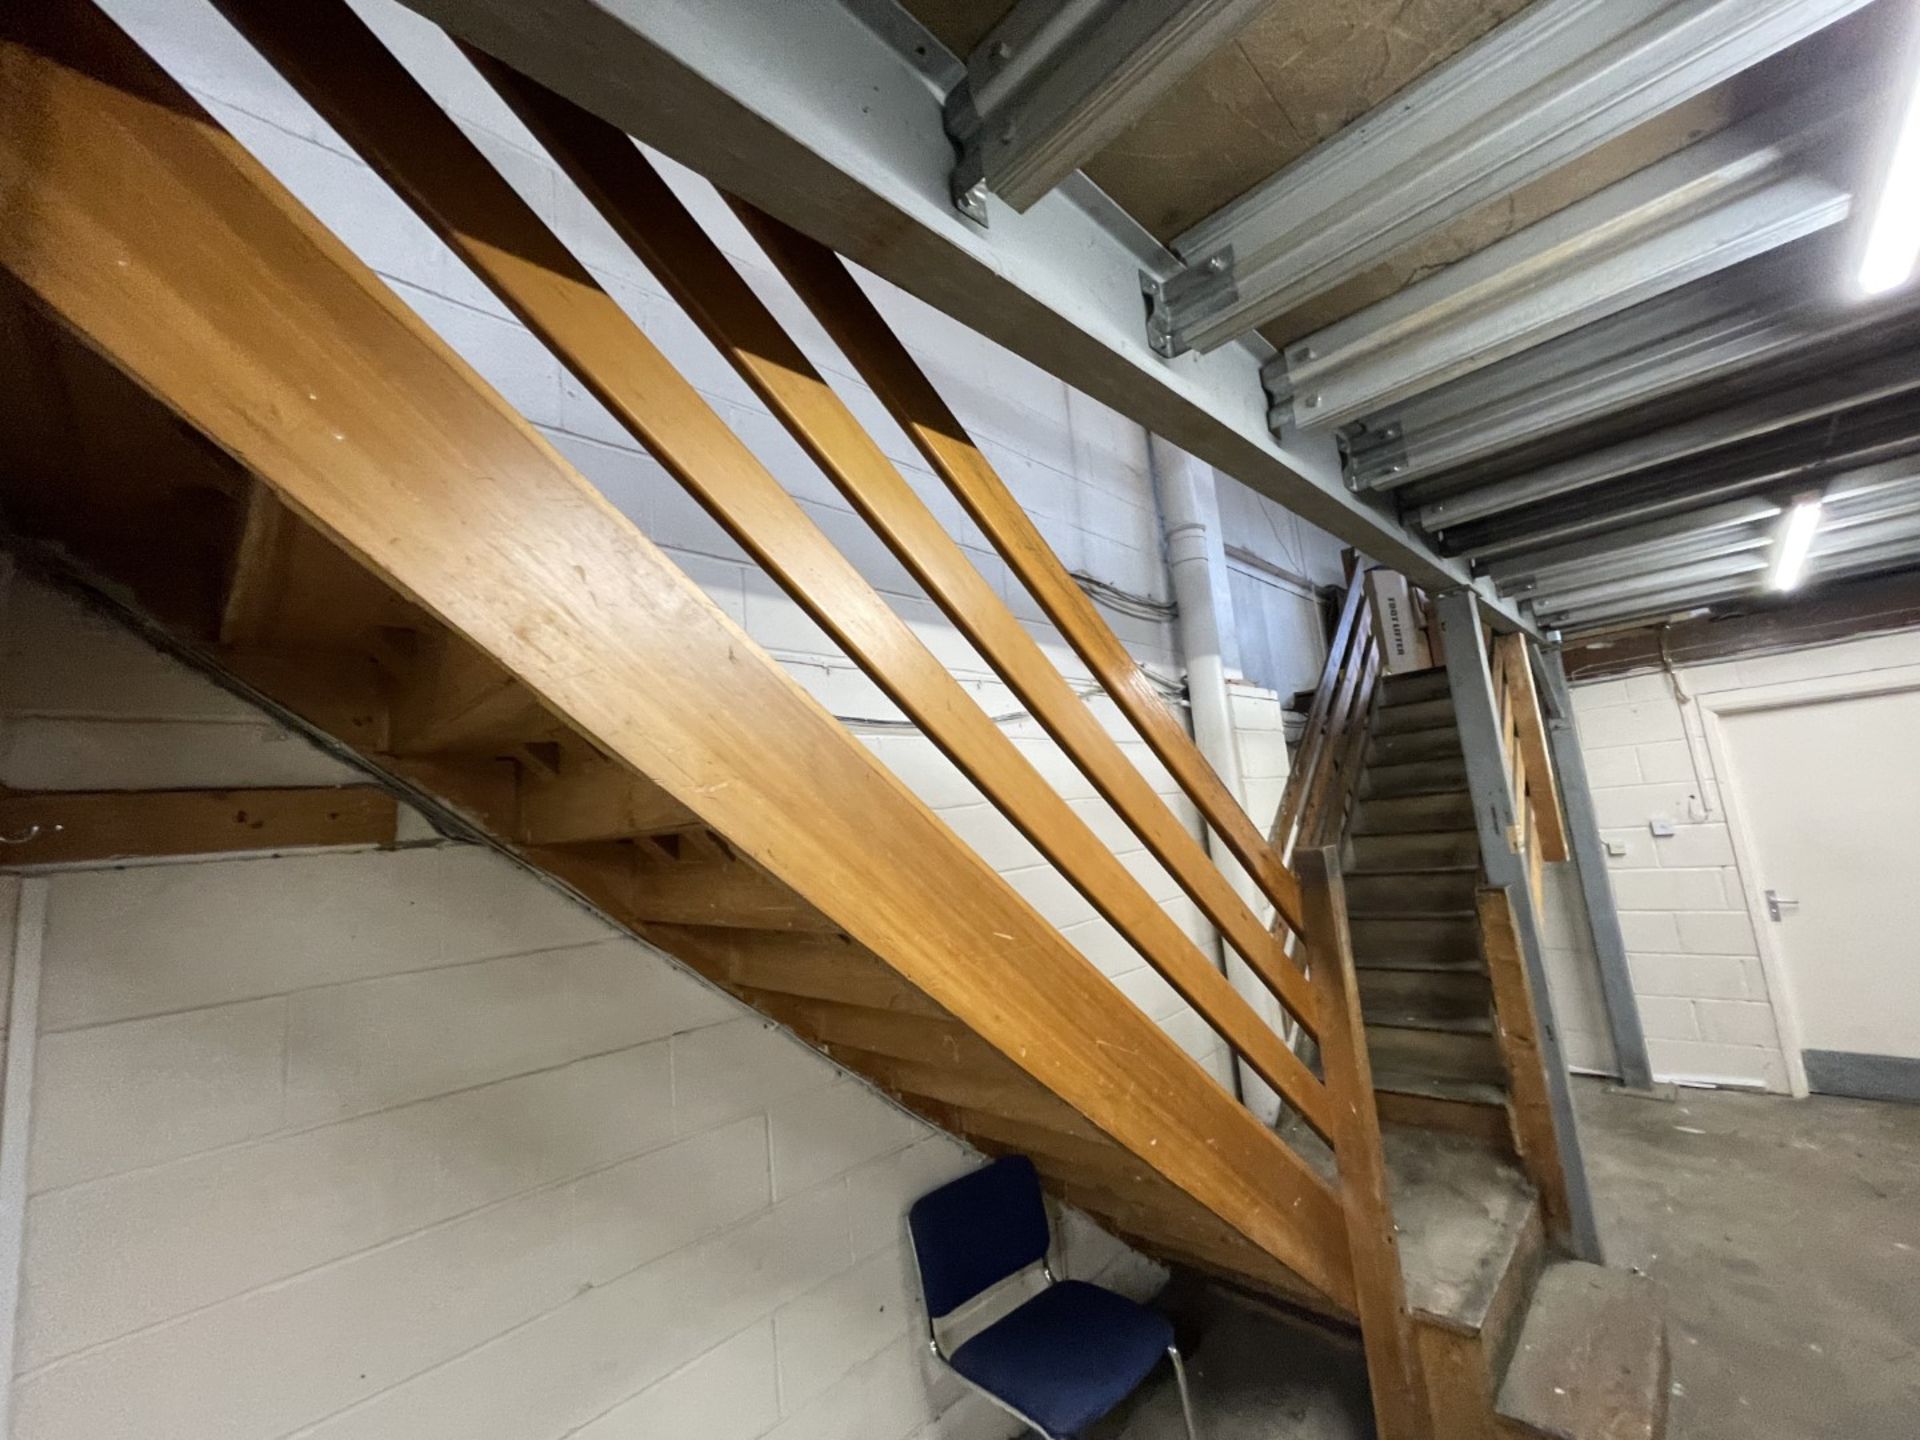 1 x Warehouse Mezzanine Floor With Floor Boards, Lights and Wooden Staircase - Approx Size: 16 x 16m - Image 13 of 30